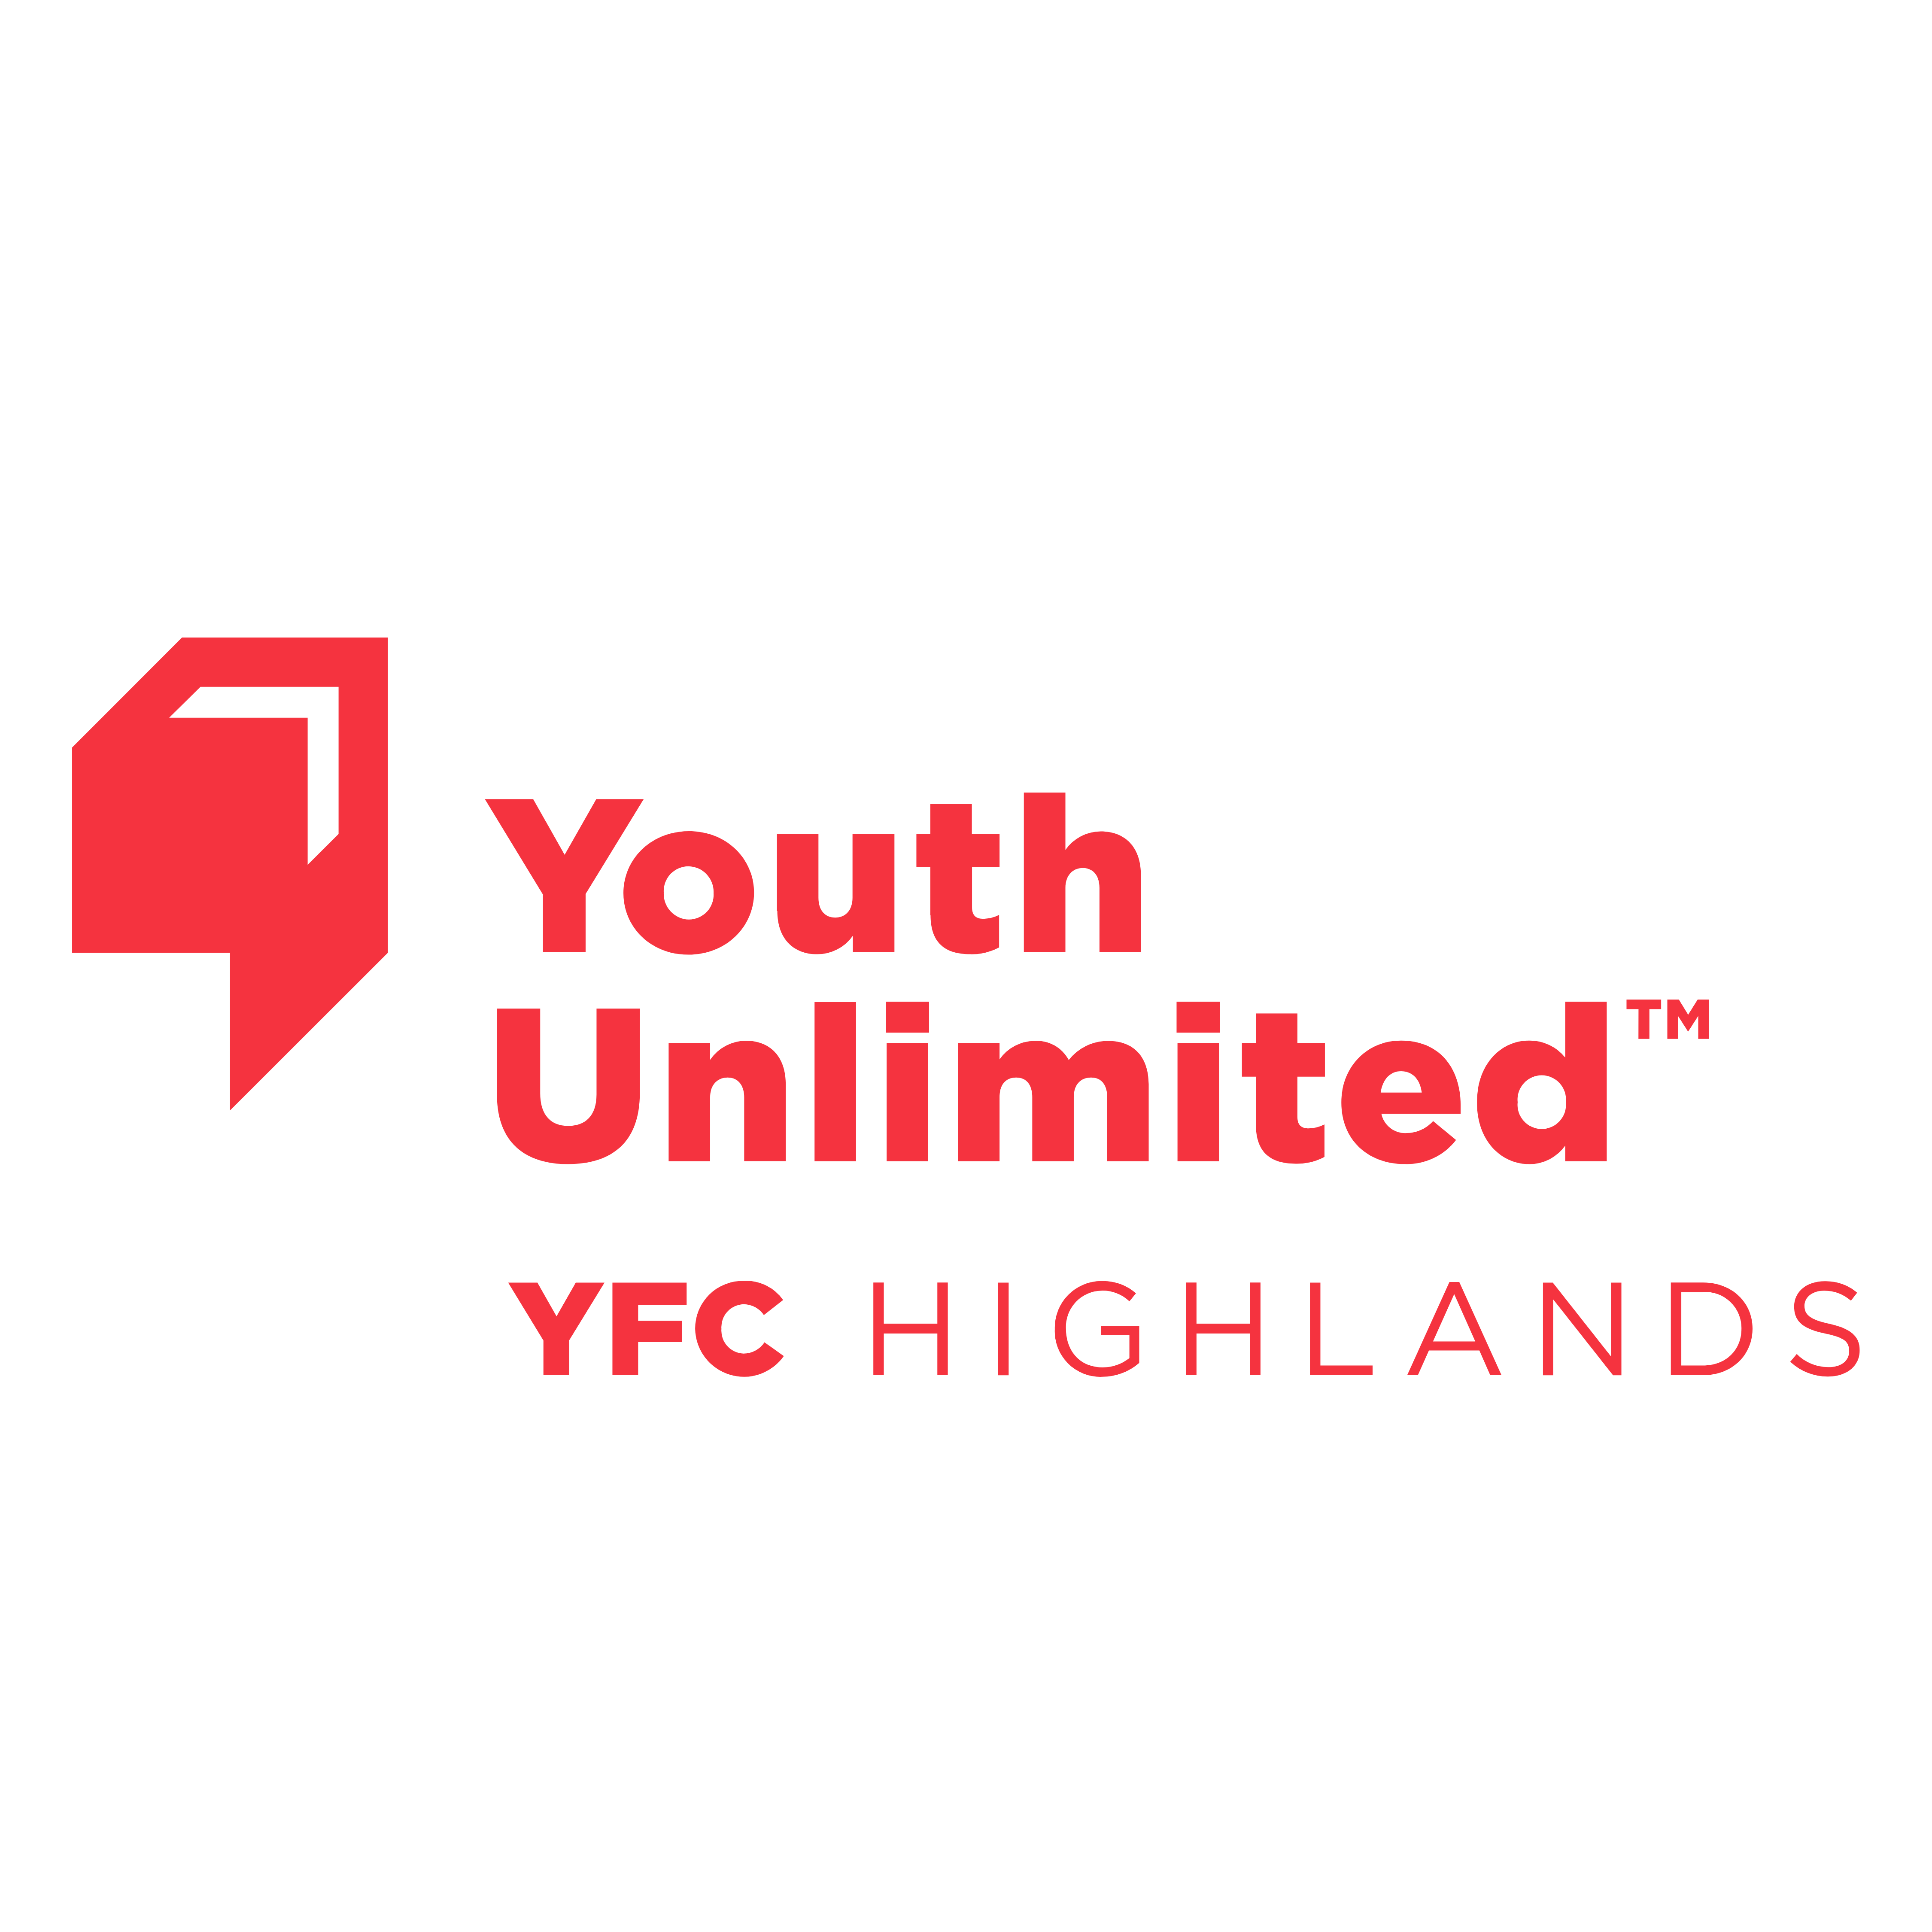 Highlands YFC | Youth Unlimited